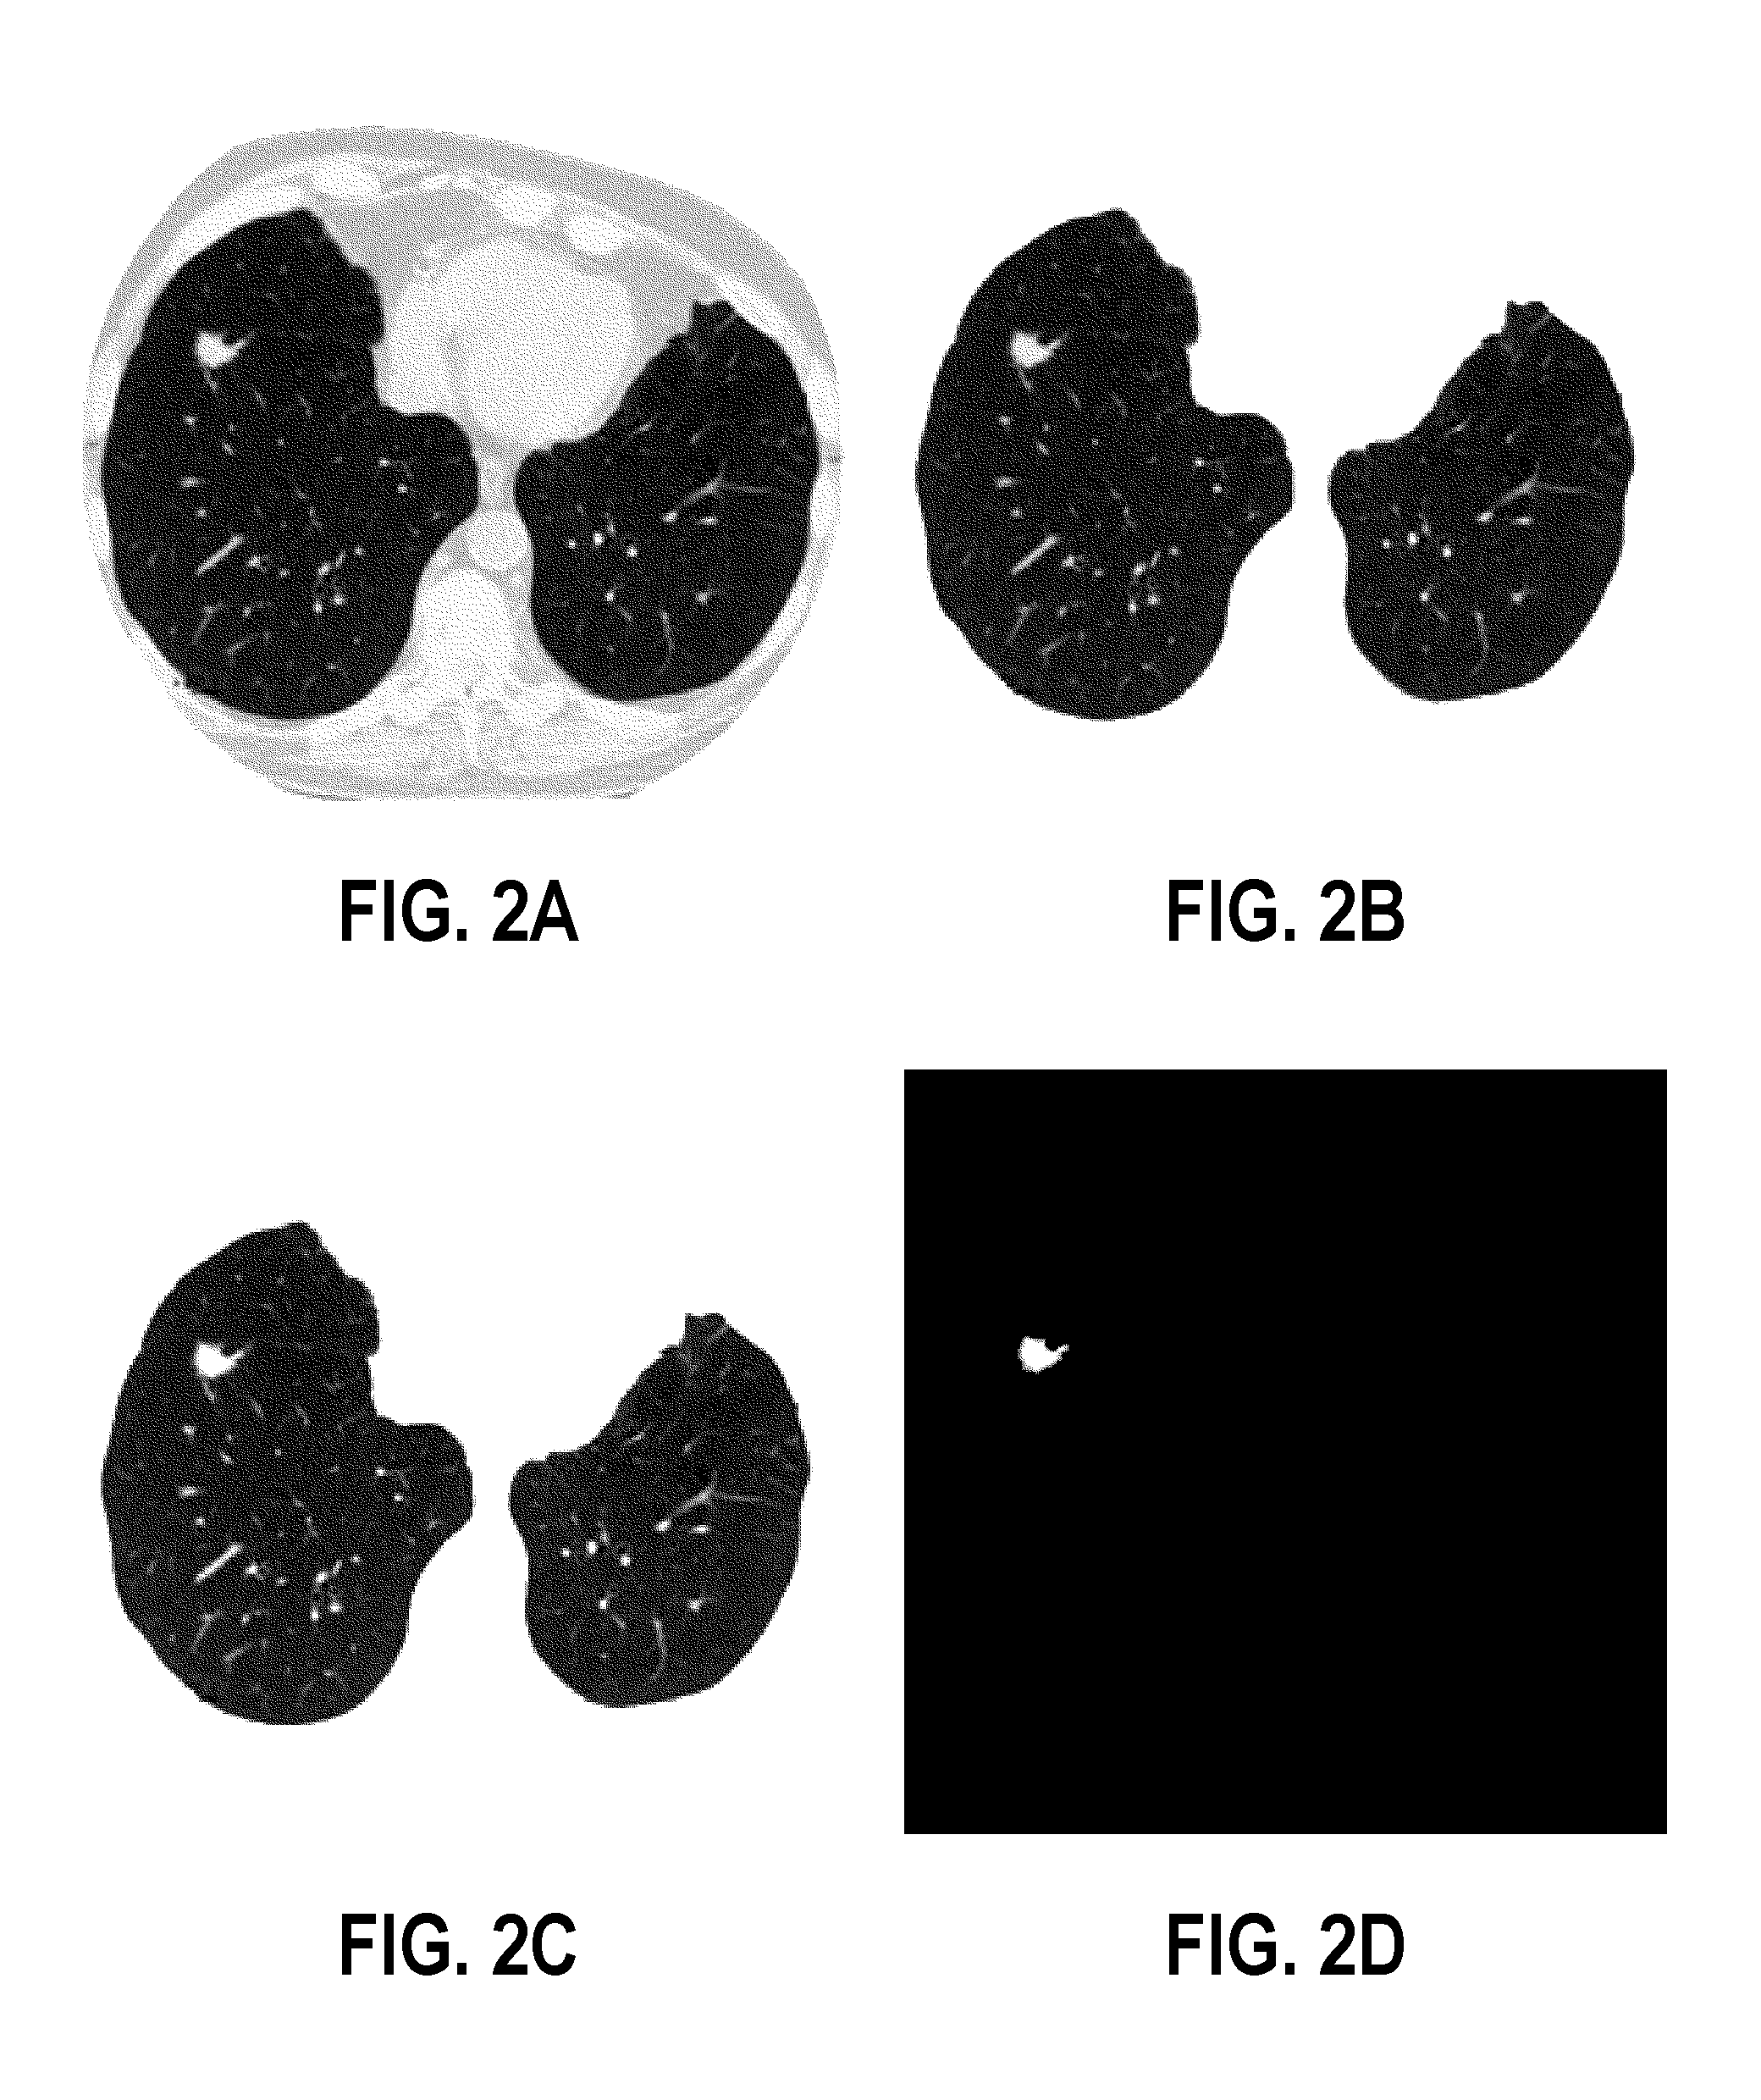 Computer aided diagnostic system incorporating appearance analysis for diagnosing malignant lung nodules